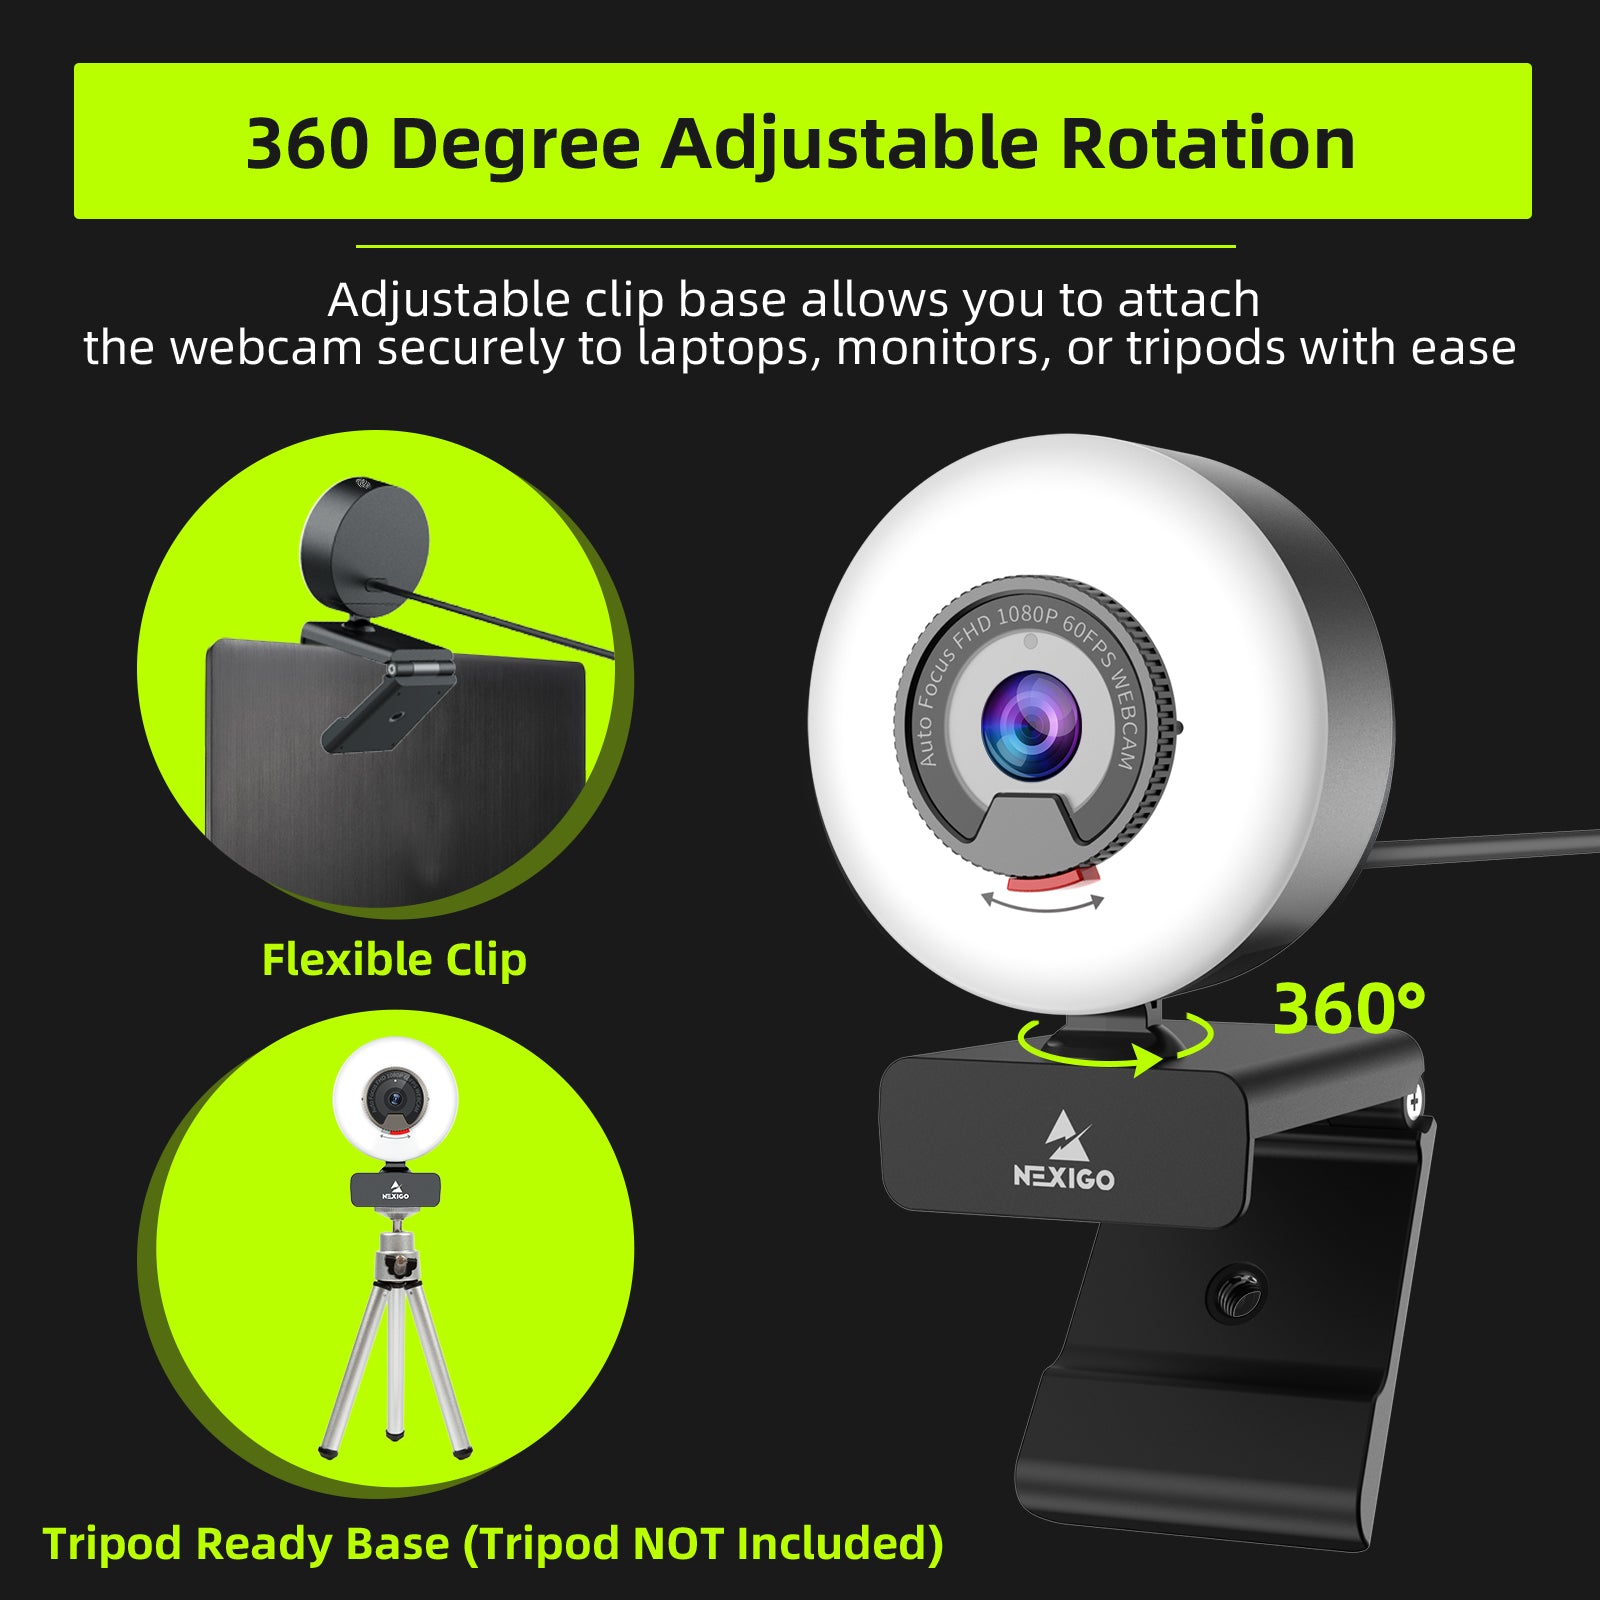 The top webcam can rotate 260° and can be placed on a computer or tripod.